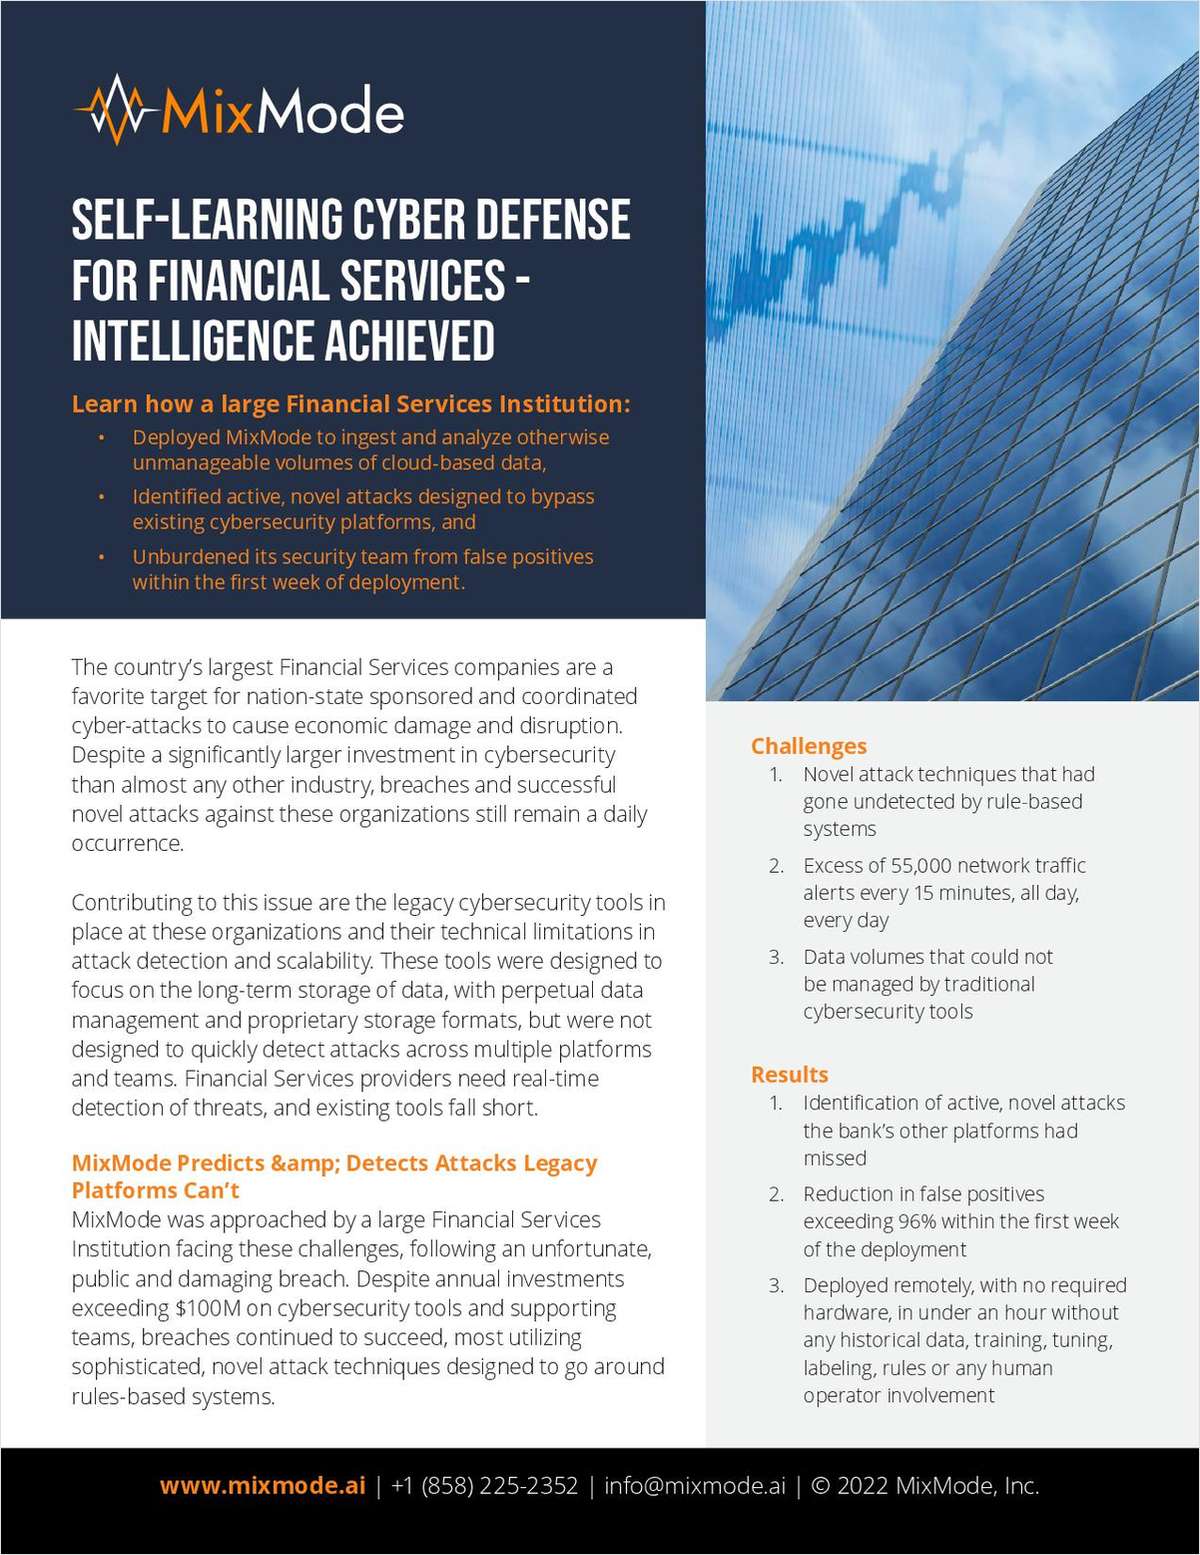 Self-Learning Cyber Defense for Financial Services - Intelligence Achieved